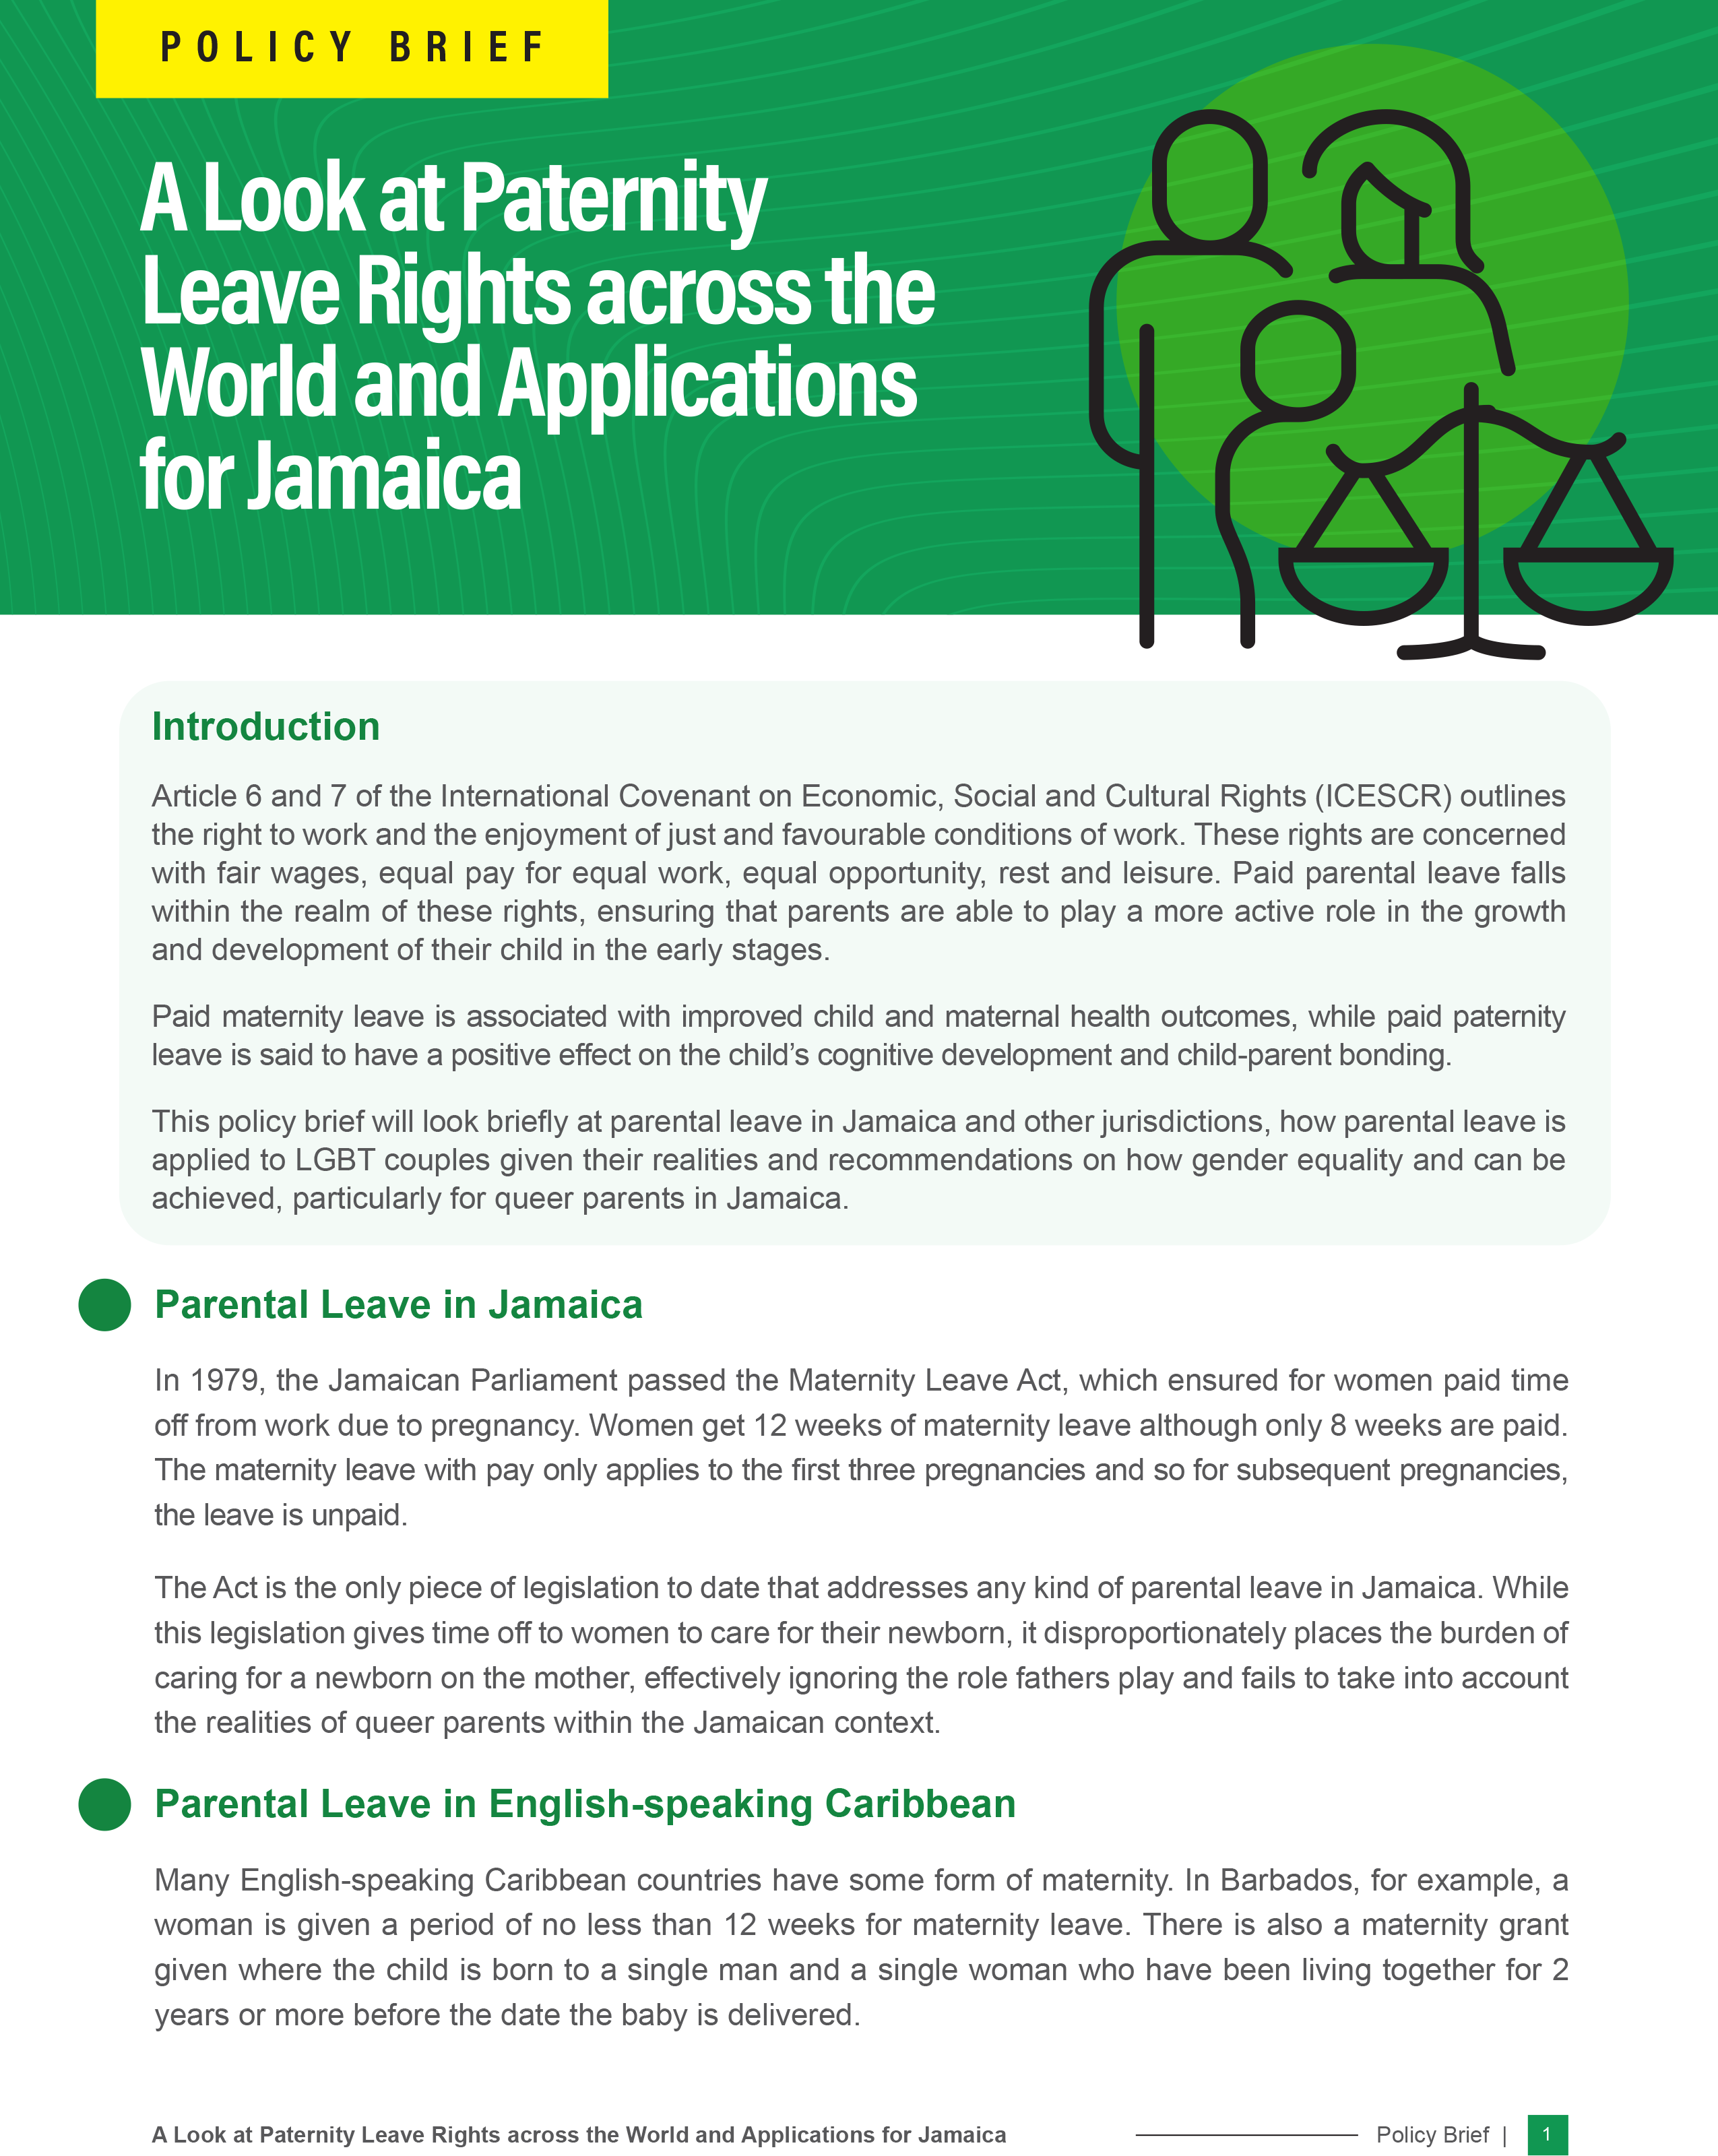 A Look at Paternity Leave Rights Across the World & Applications for Jamaica